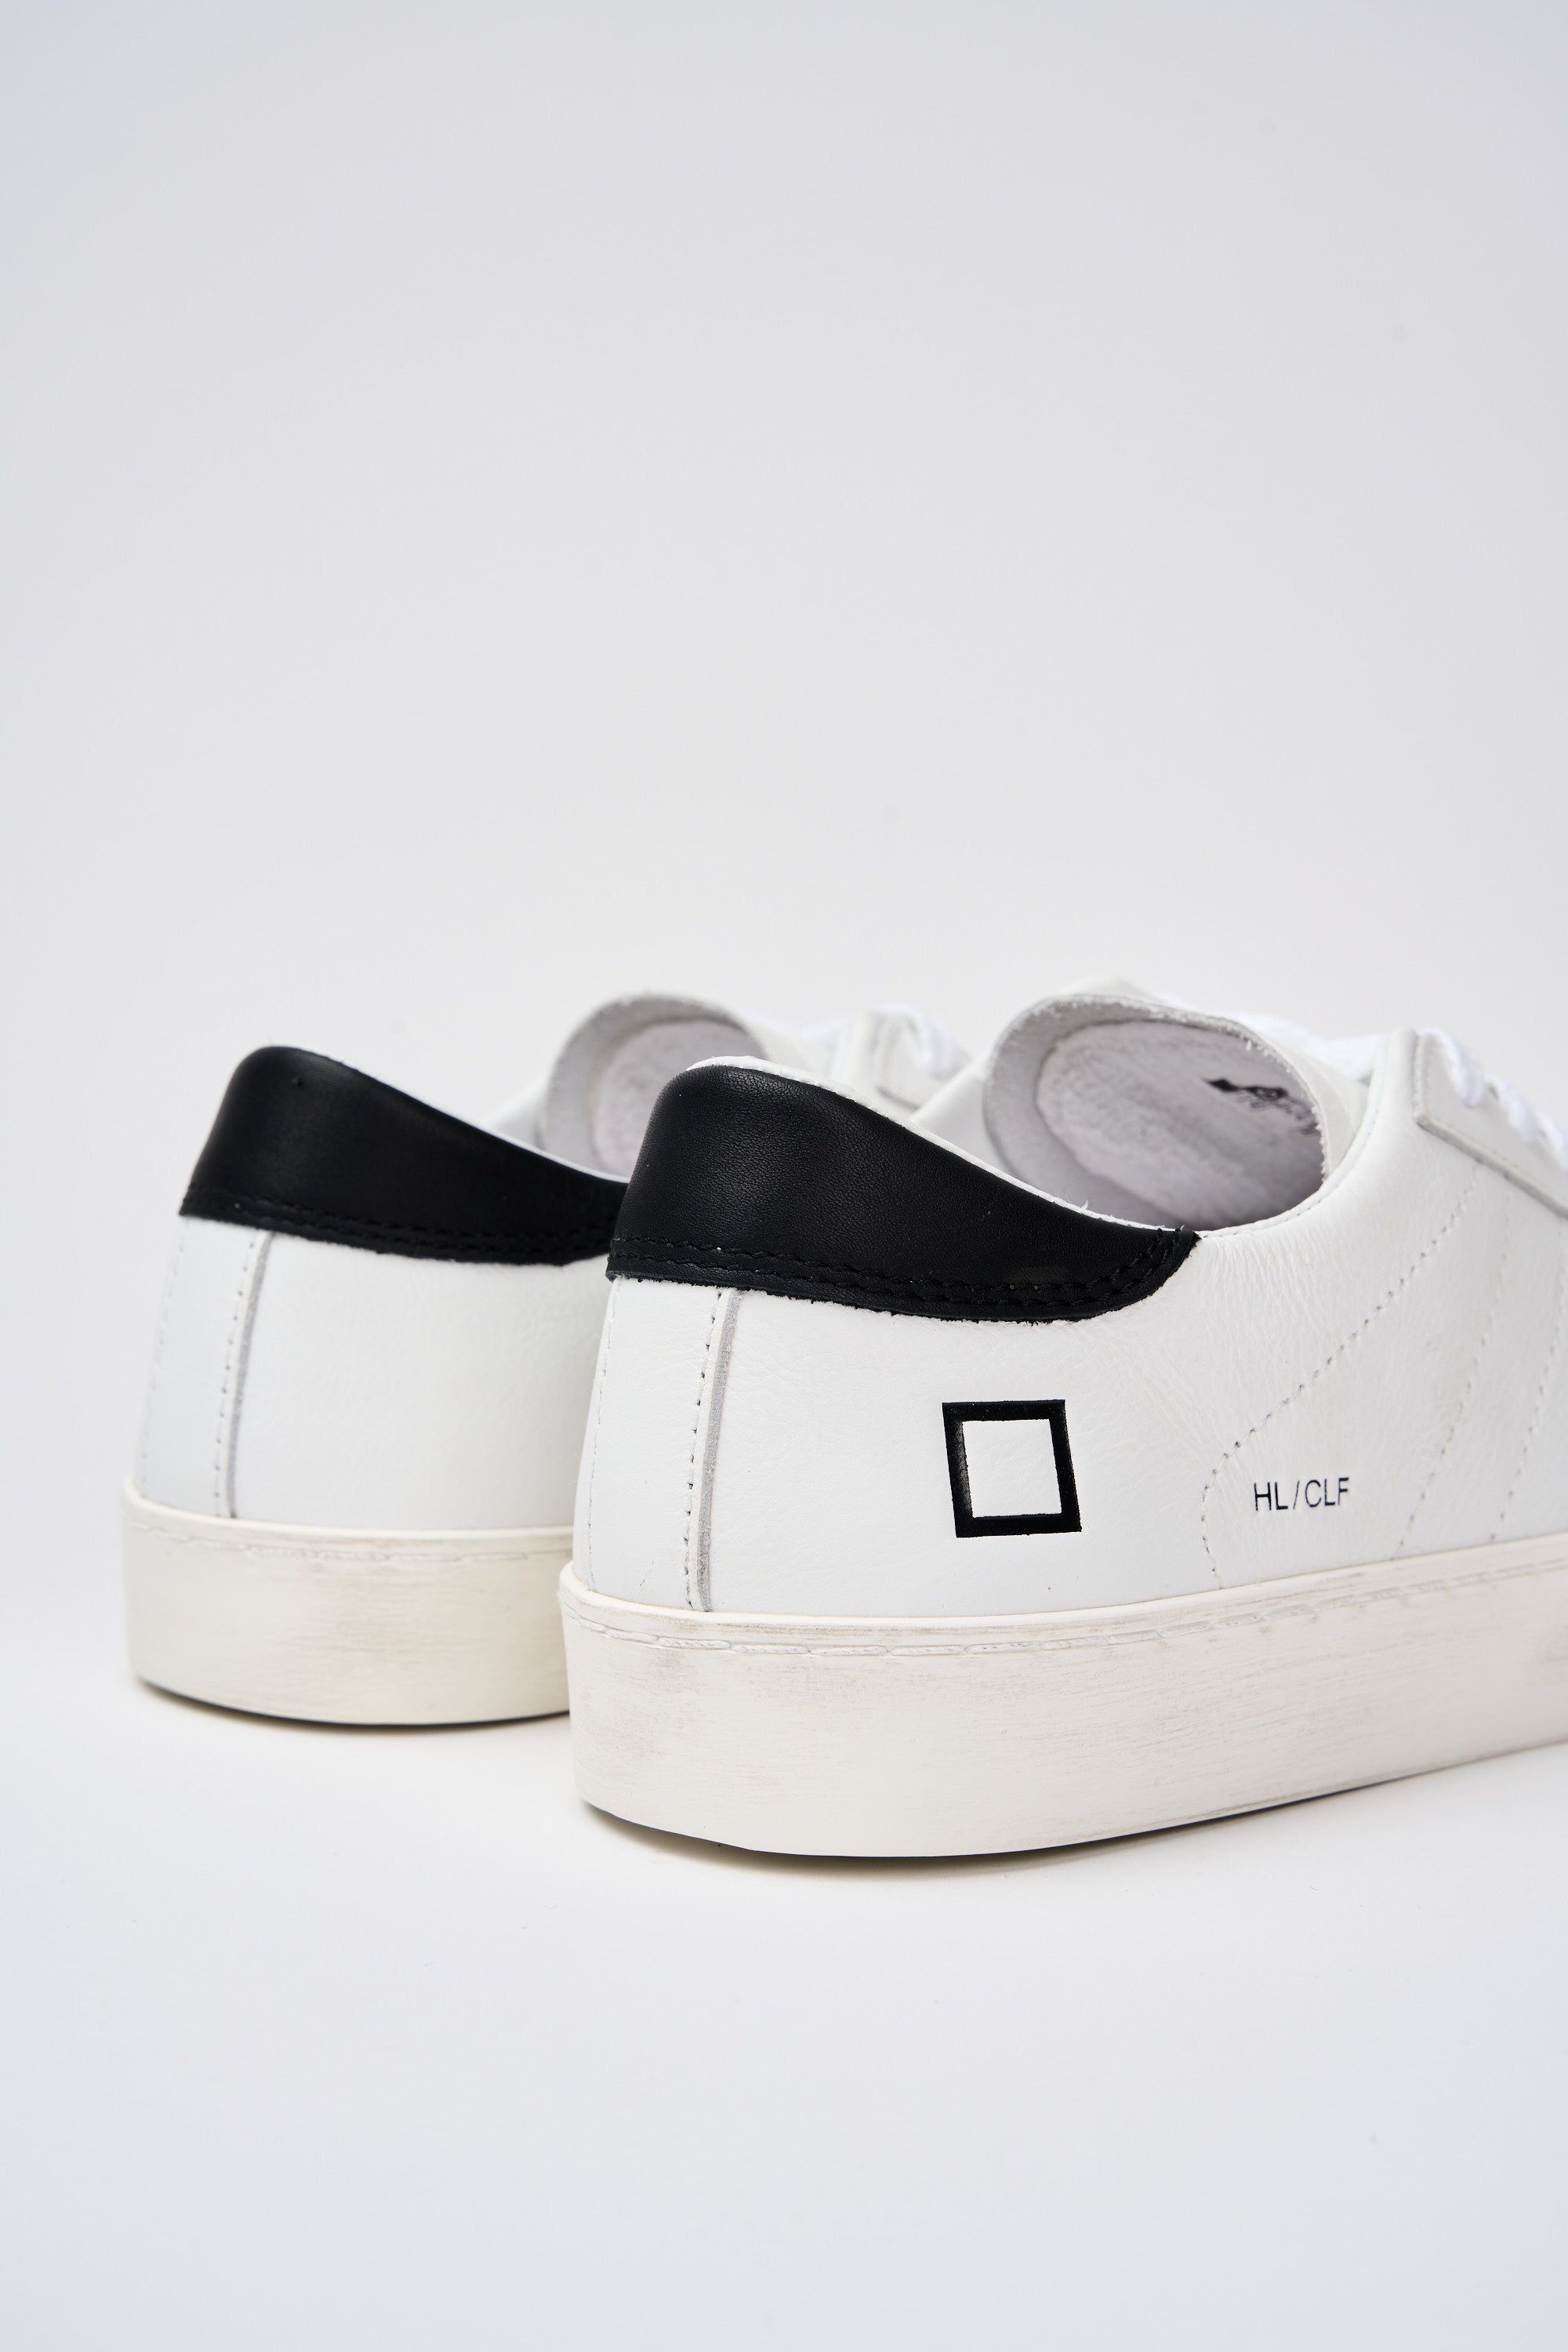 D.A.T.E. Sneaker Hill Leather/Suede White/Black-4